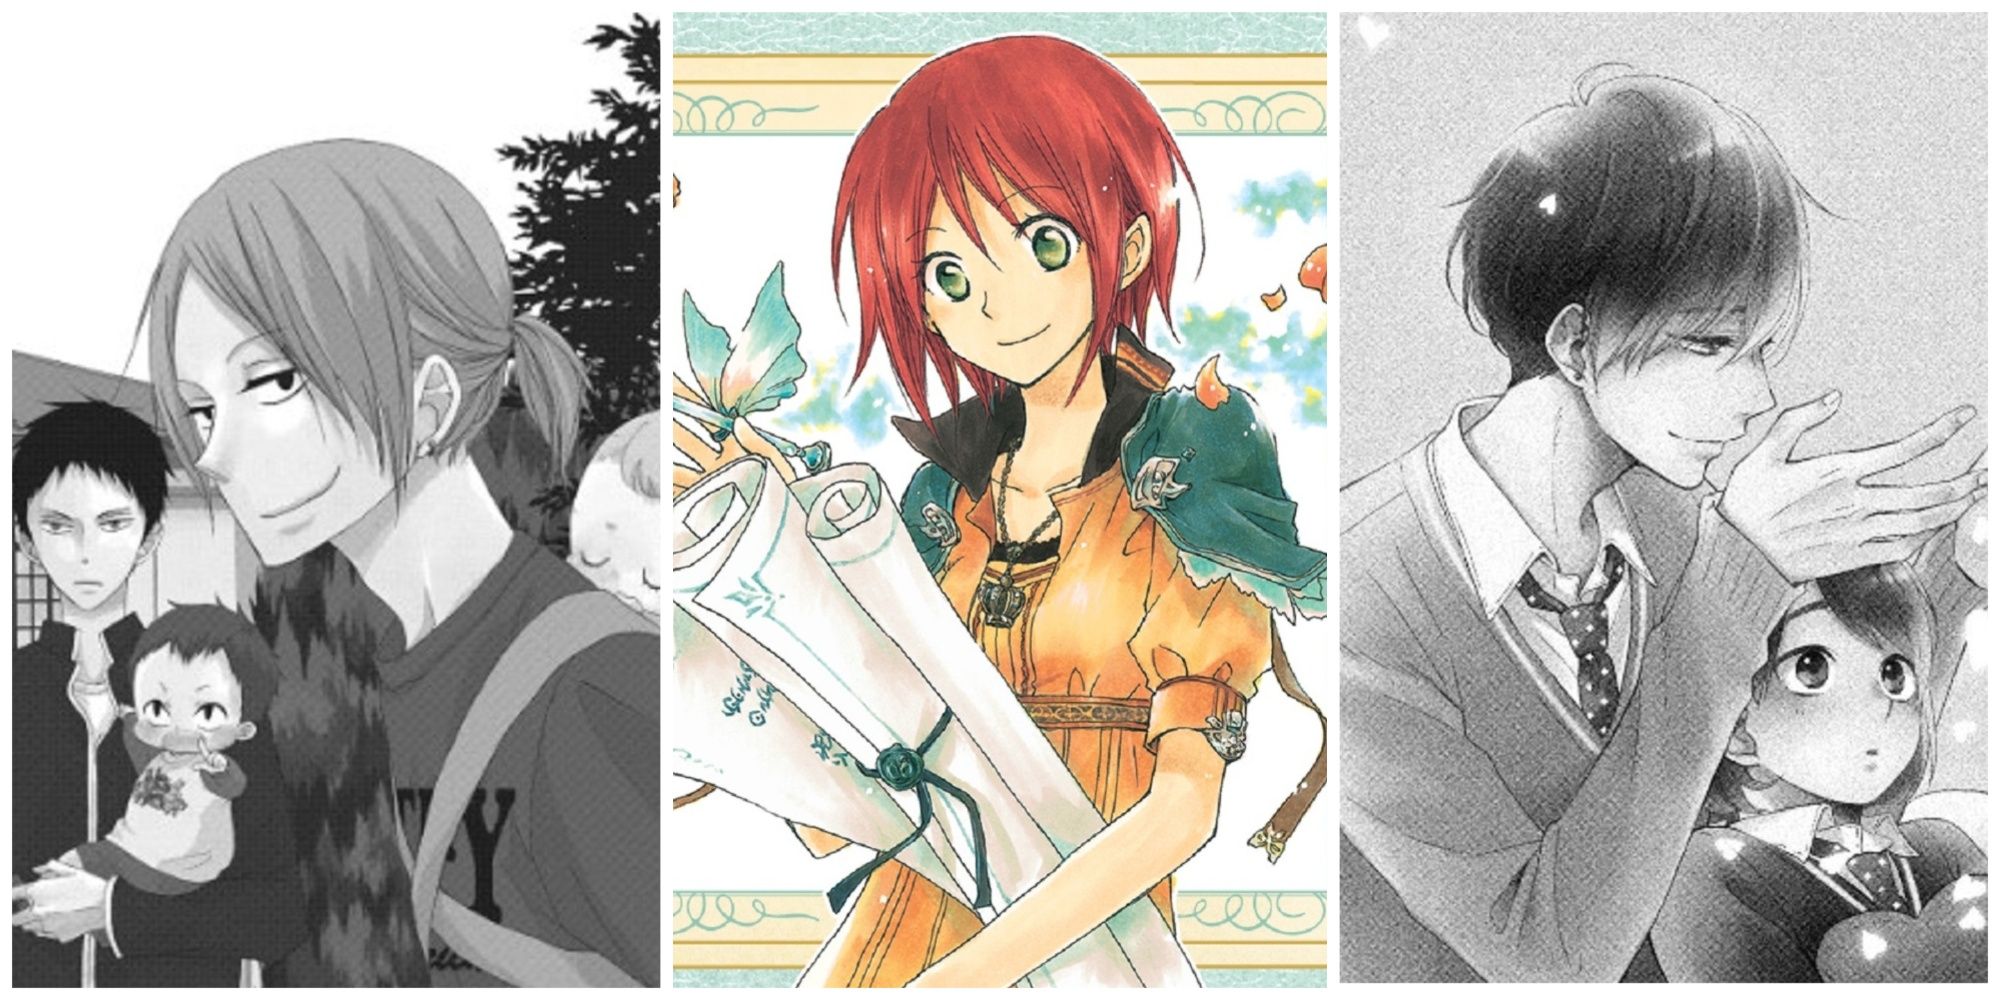 8 Shojo Manga To Catch Up On Before They End